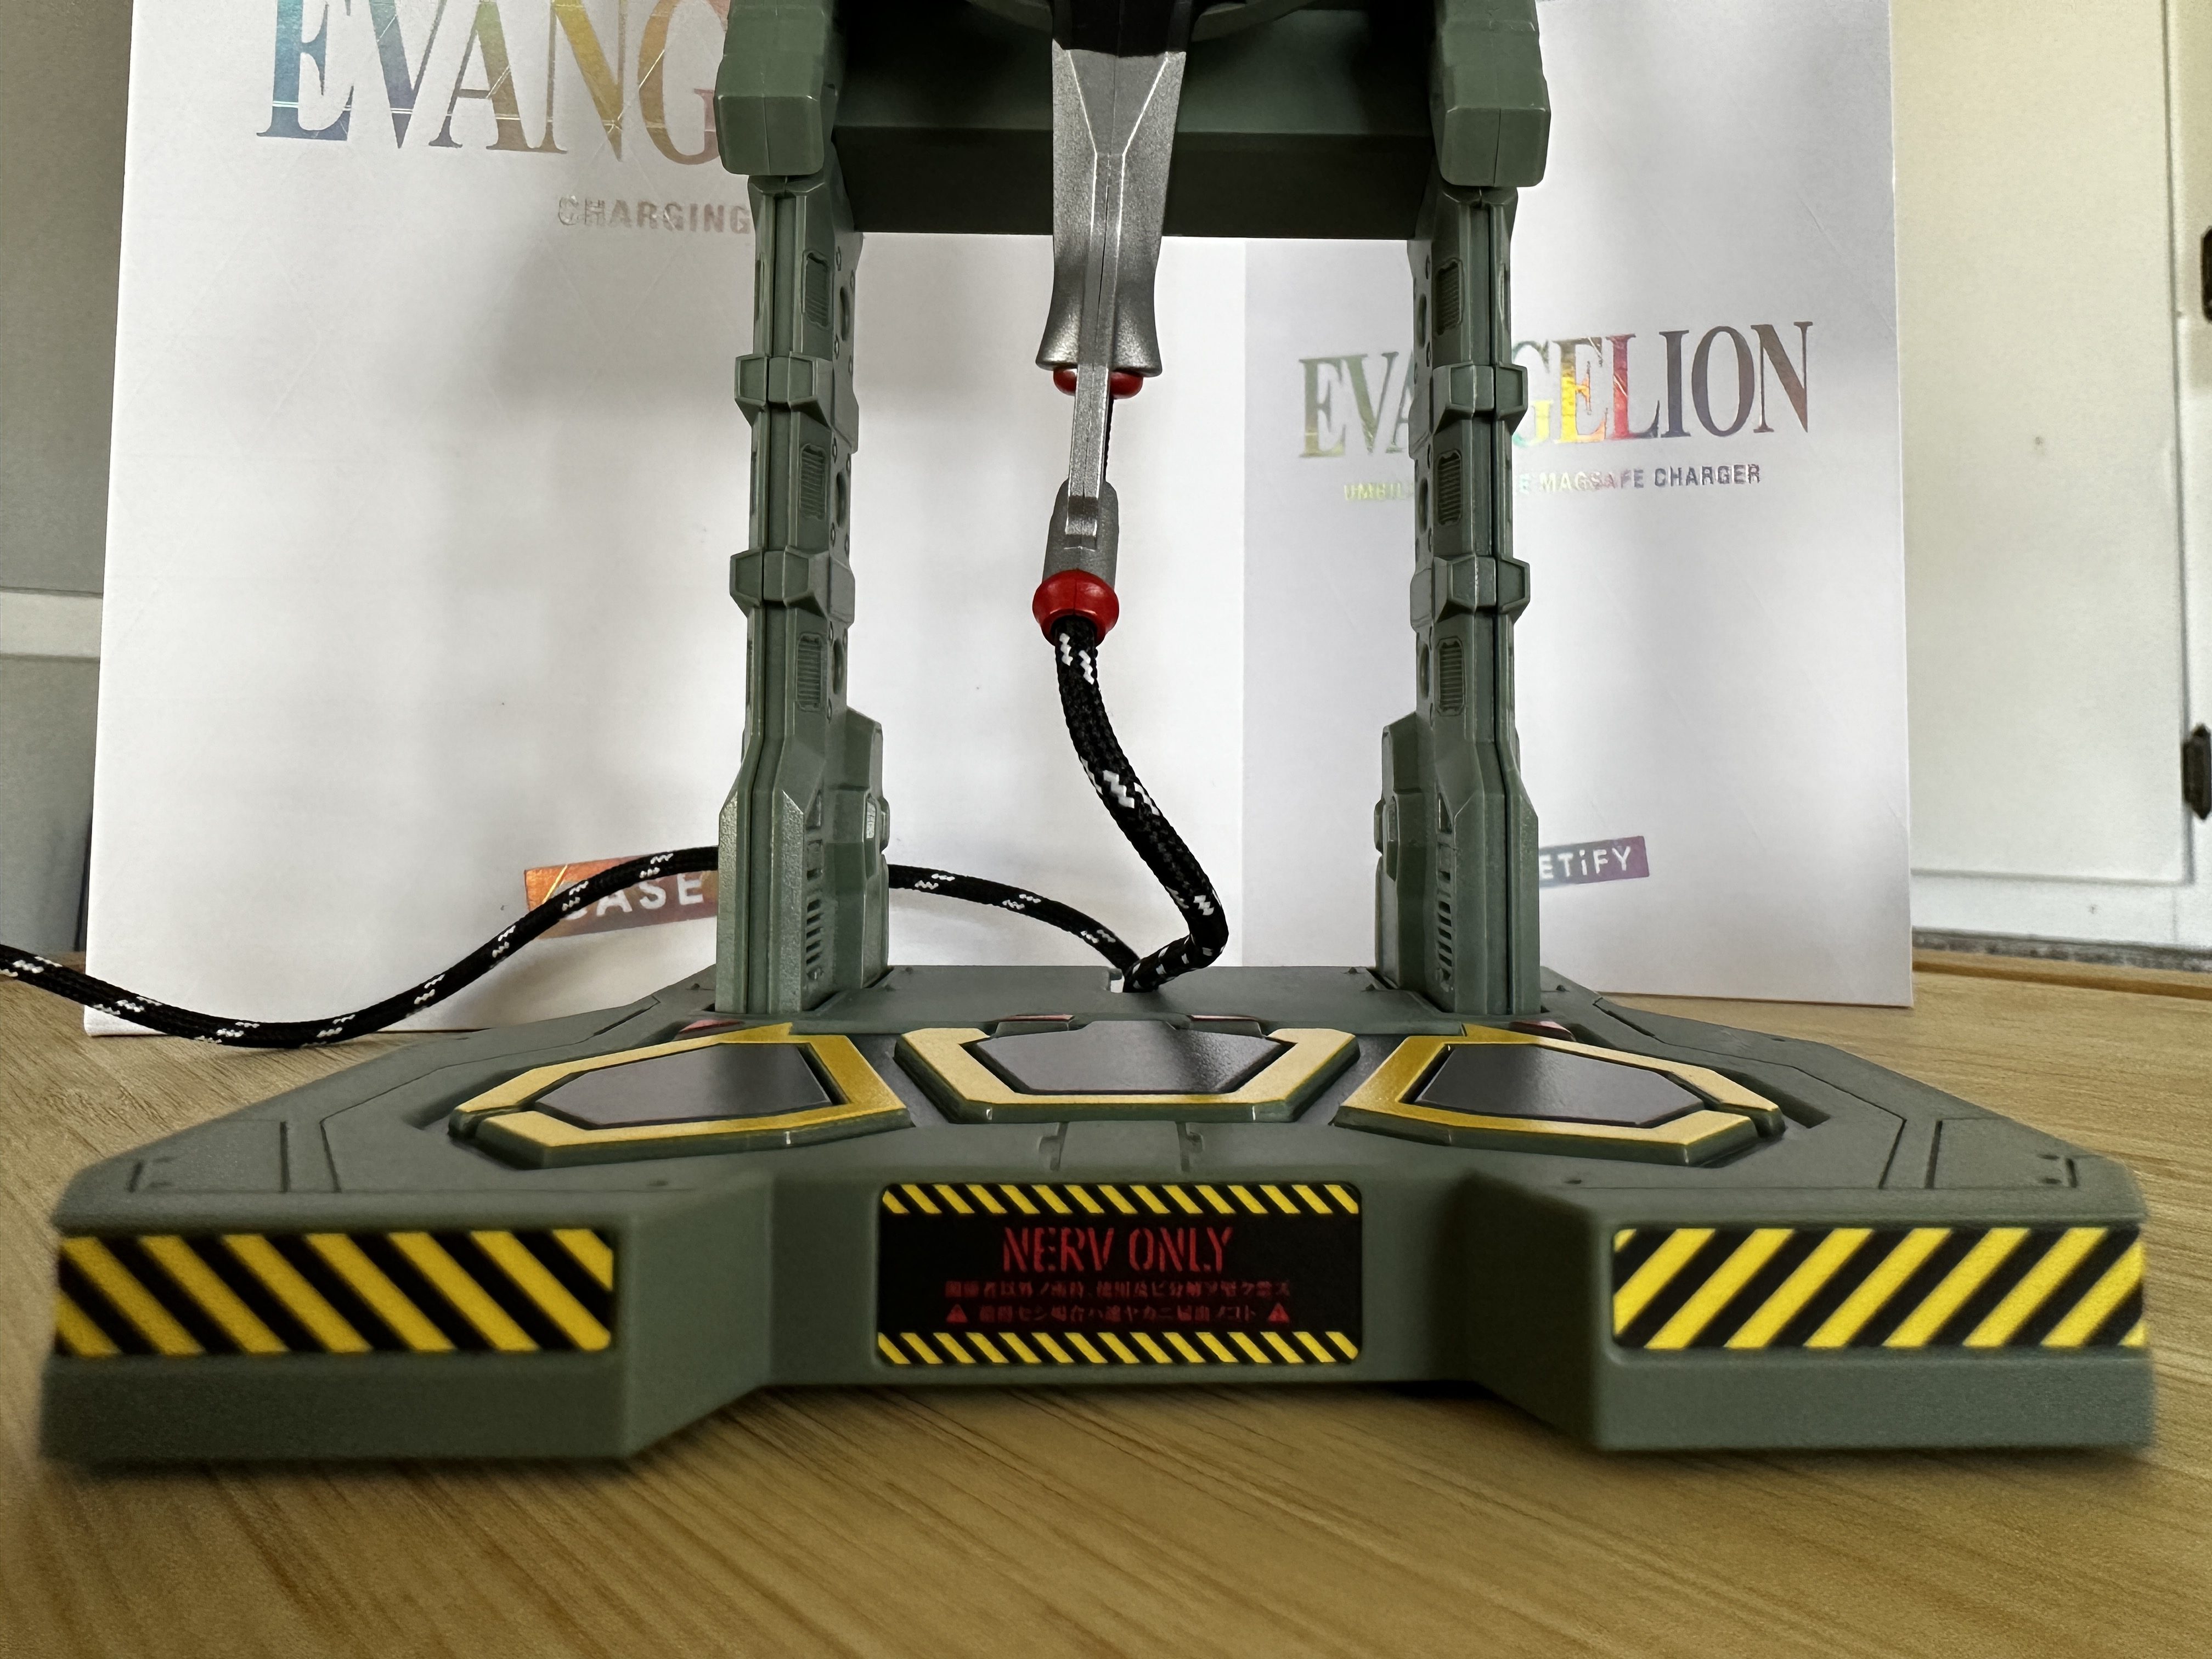 CASETiFY Evangelion Charging Dock base view.